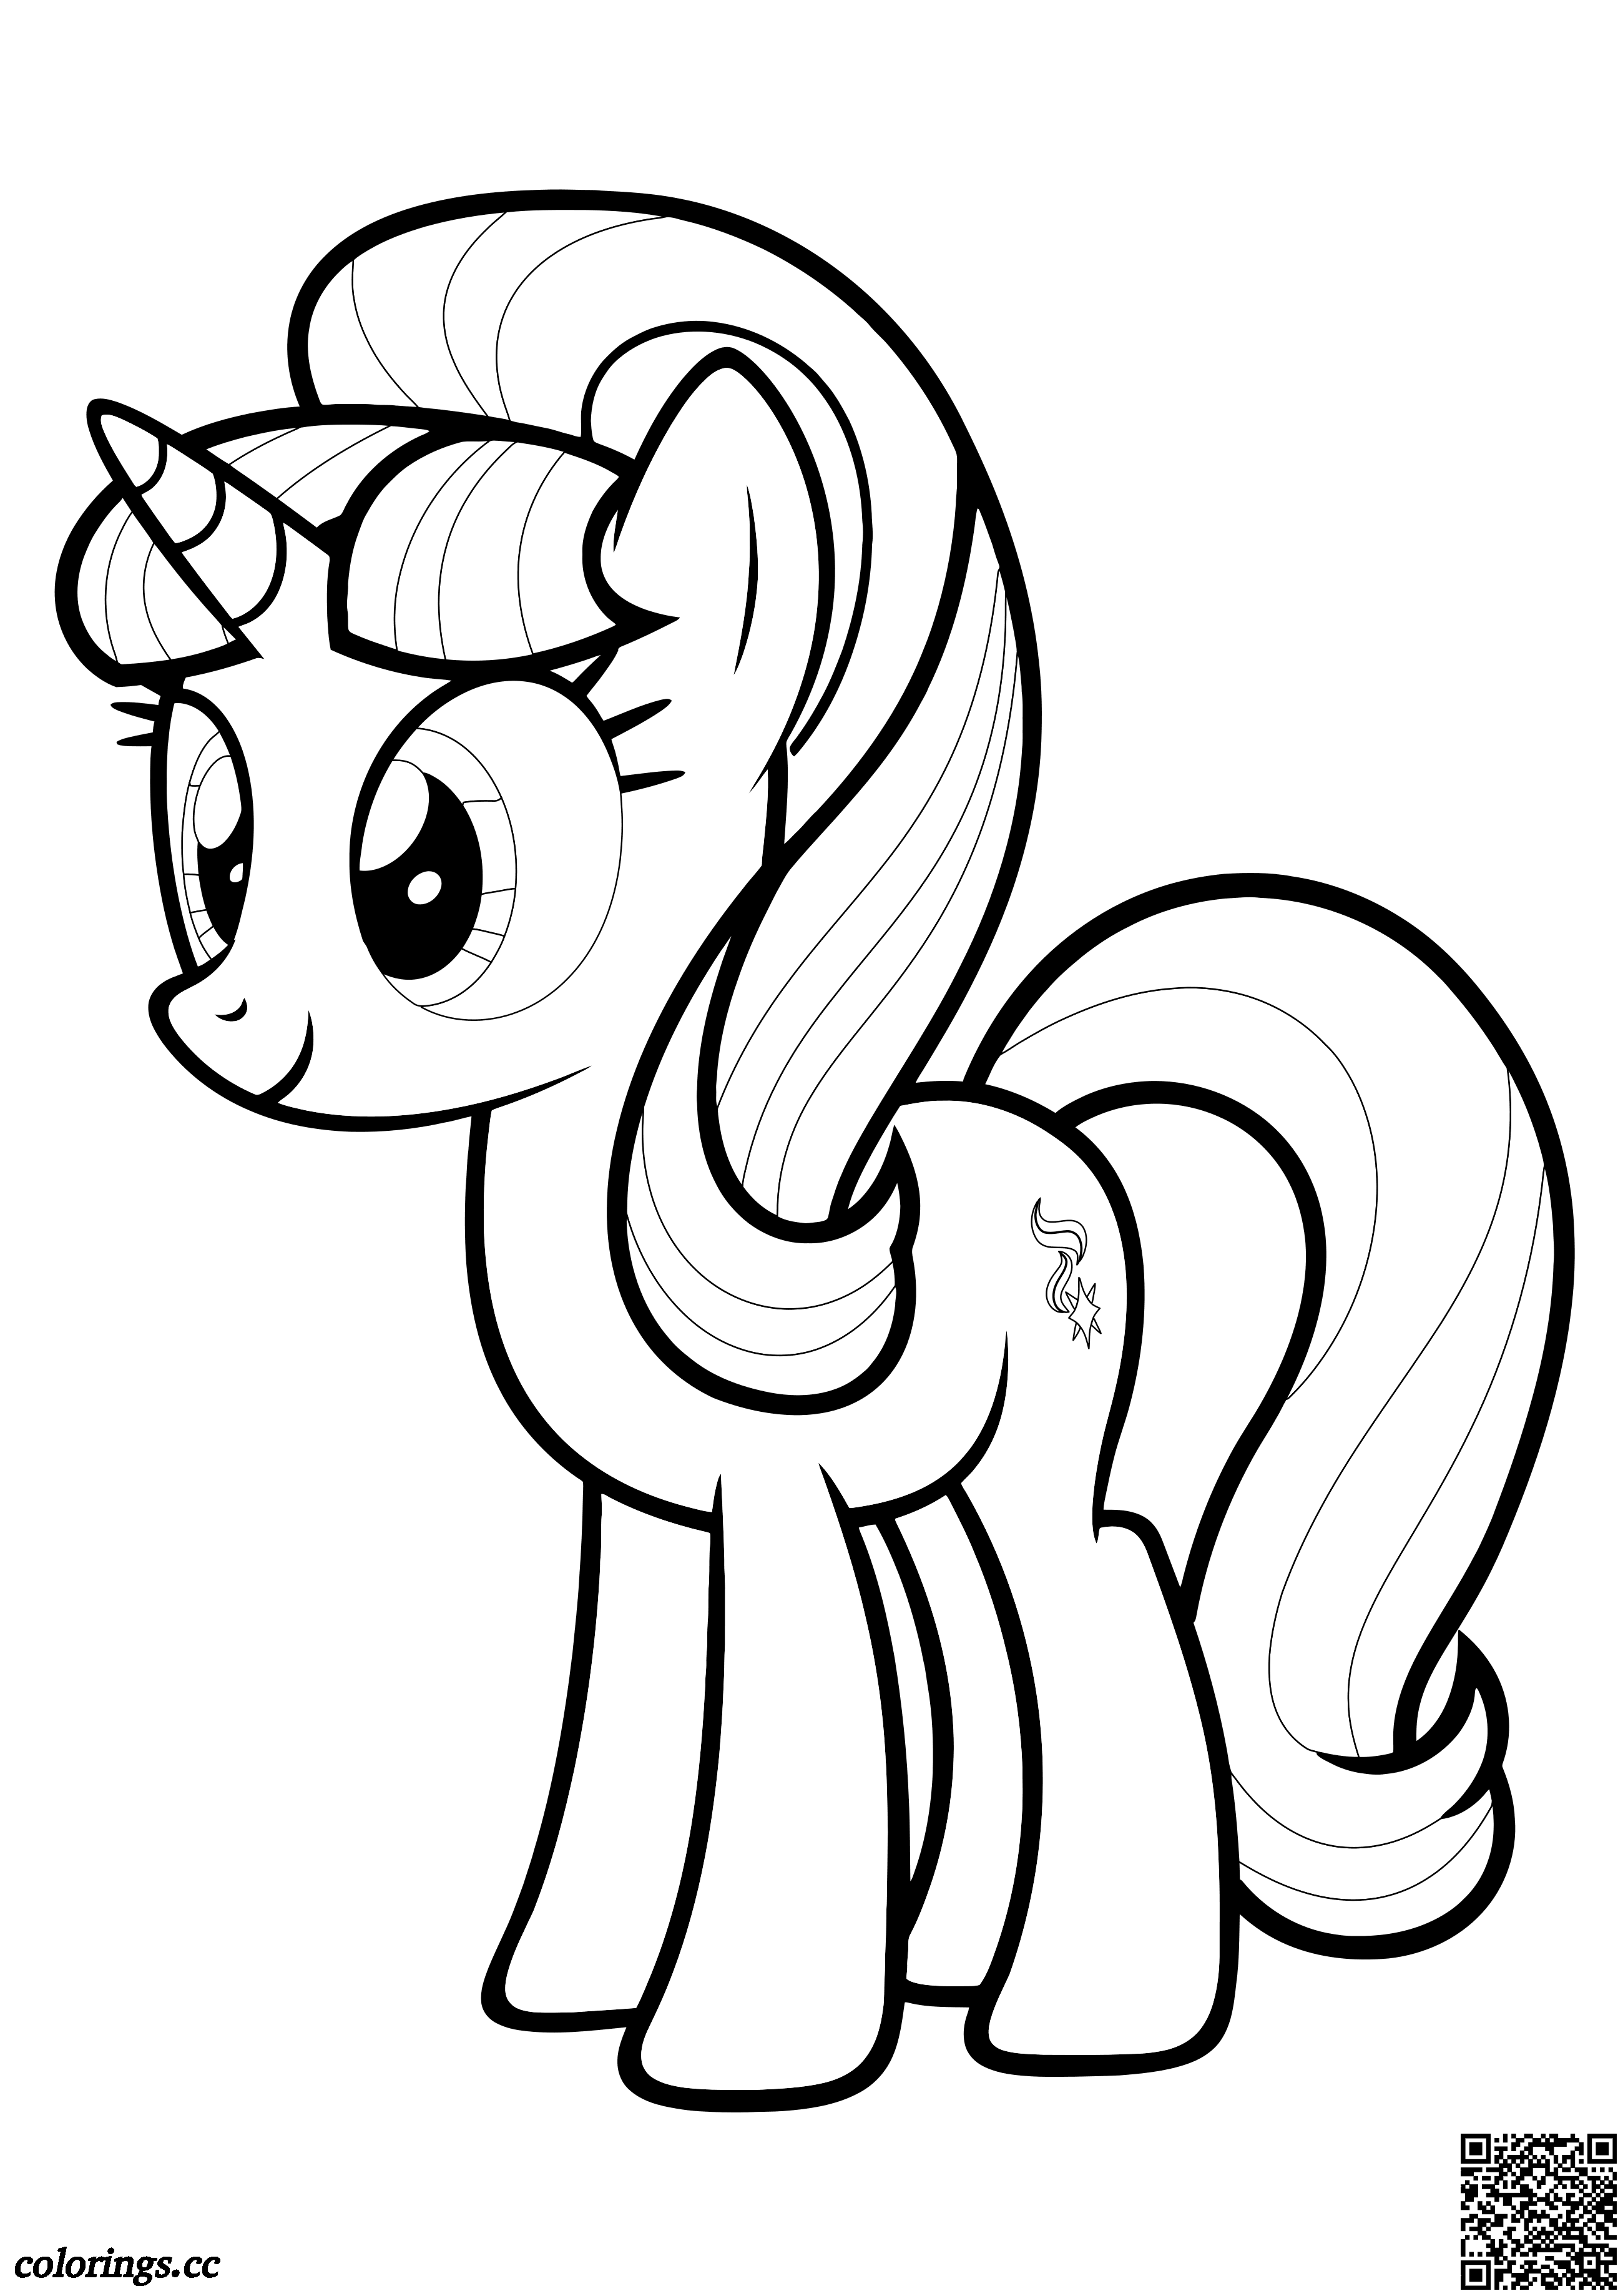 Starlight Glimmer coloring pages, My Little Pony Friendship Is ...